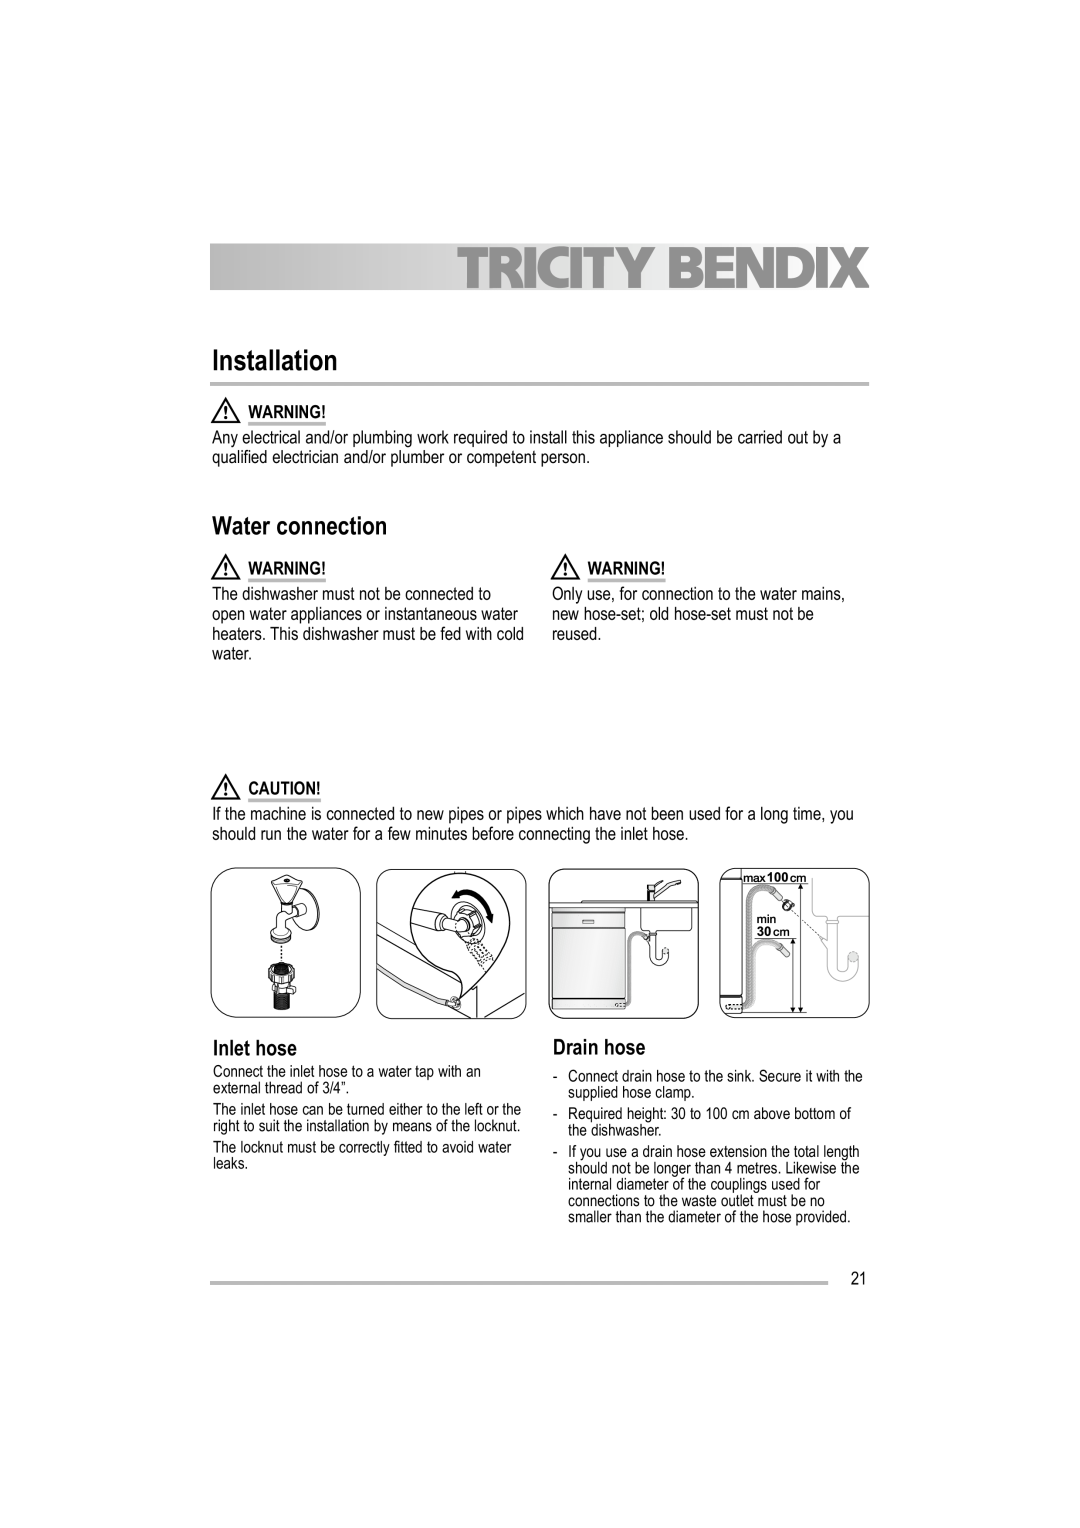 Tricity Bendix TDF 221 manual Installation, Water connection, Inlet hose, Drain hose 